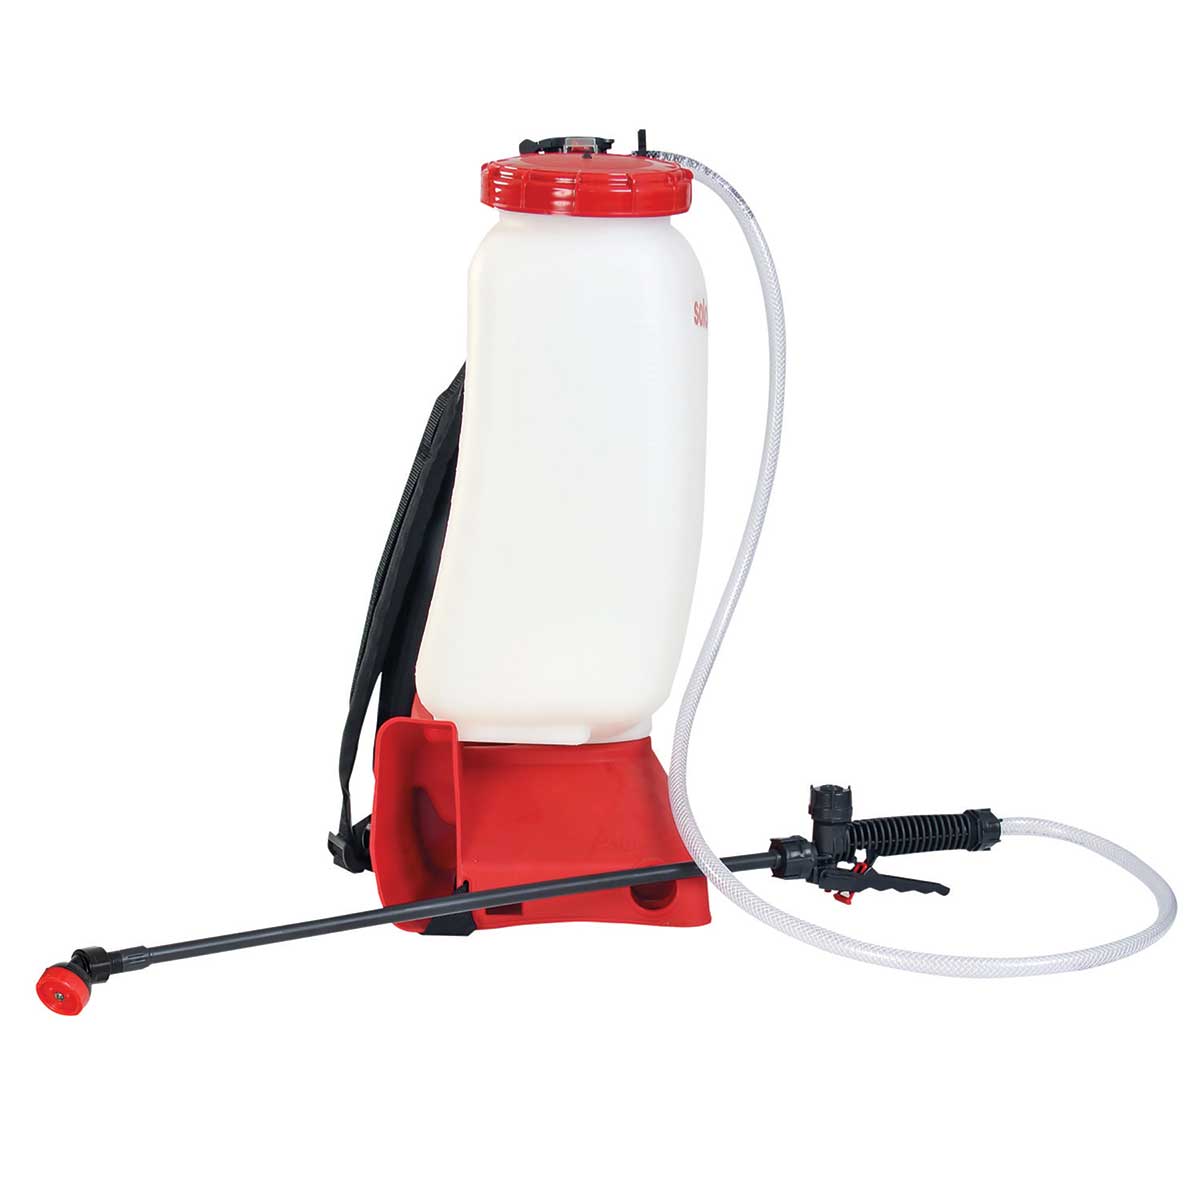 Solo 441 4 Gallon Battery-Powered Backpack Sprayer